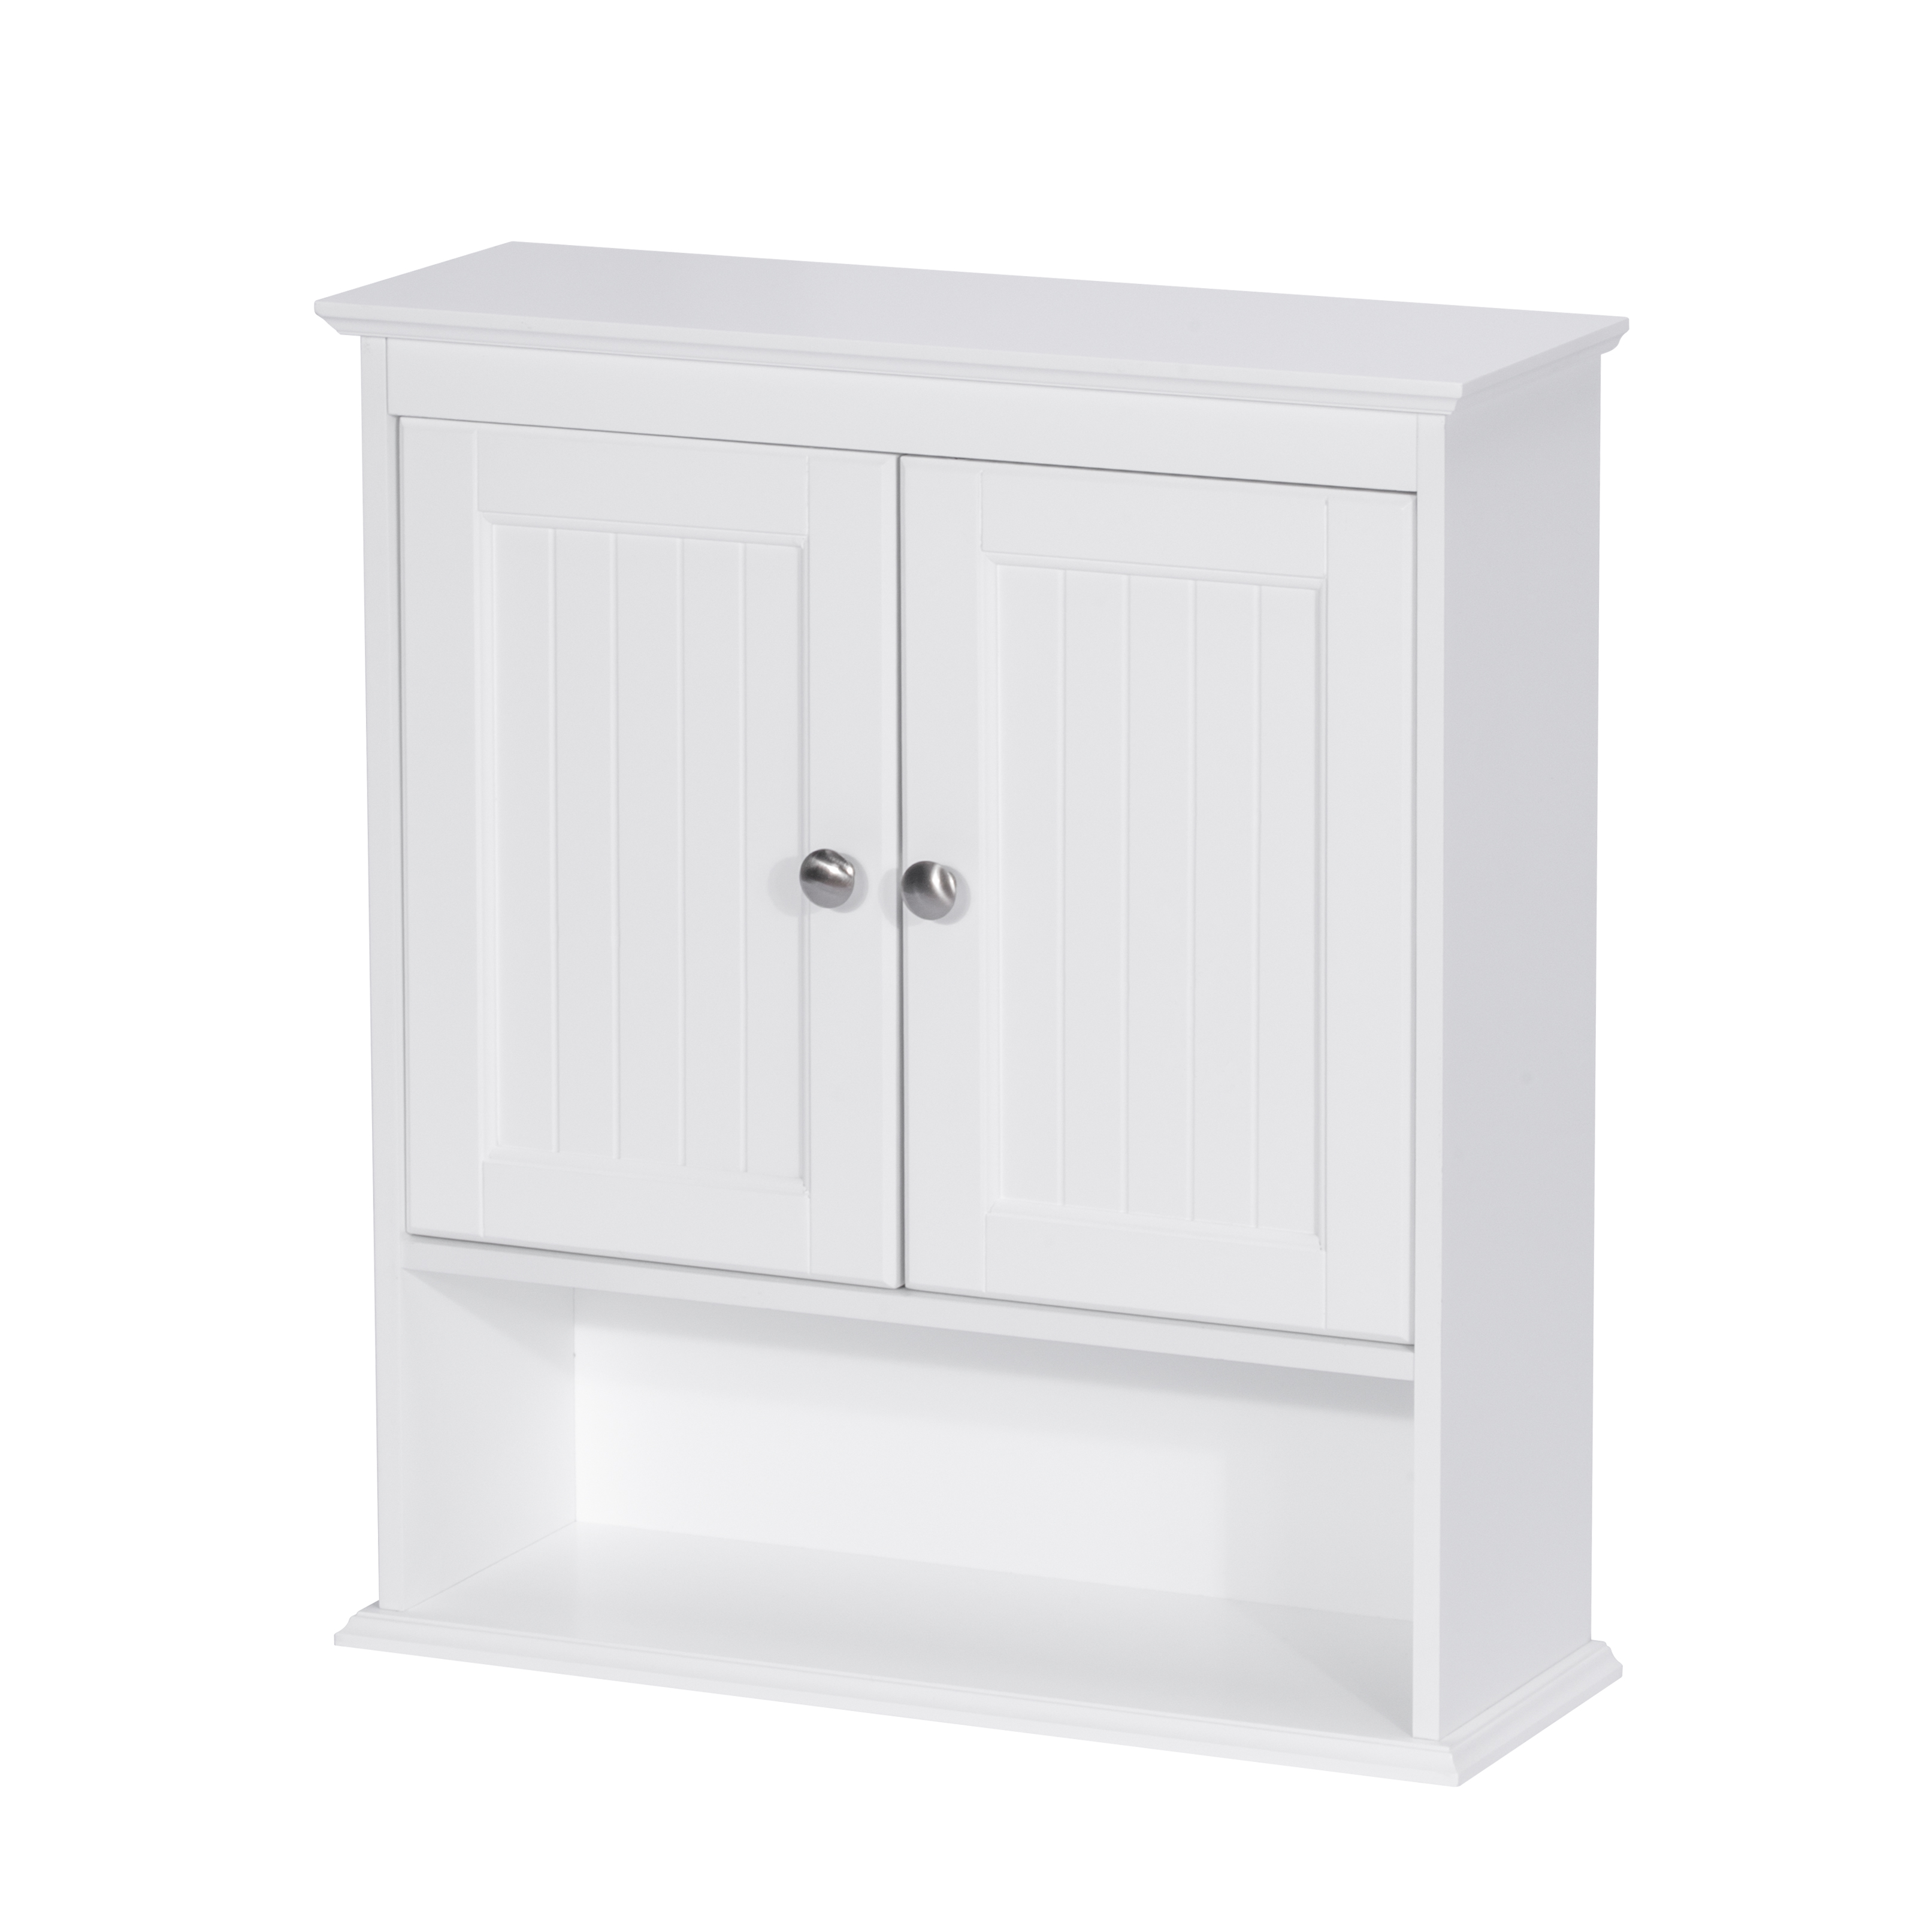 Spirich Home Bathroom Cabinet Wall Mounted with Doors, Wood Hanging Cabinet, Wall Cabinets with Doors and Shelves Over The Toilet, Bathroom Wall Cabinet White - image 3 of 6